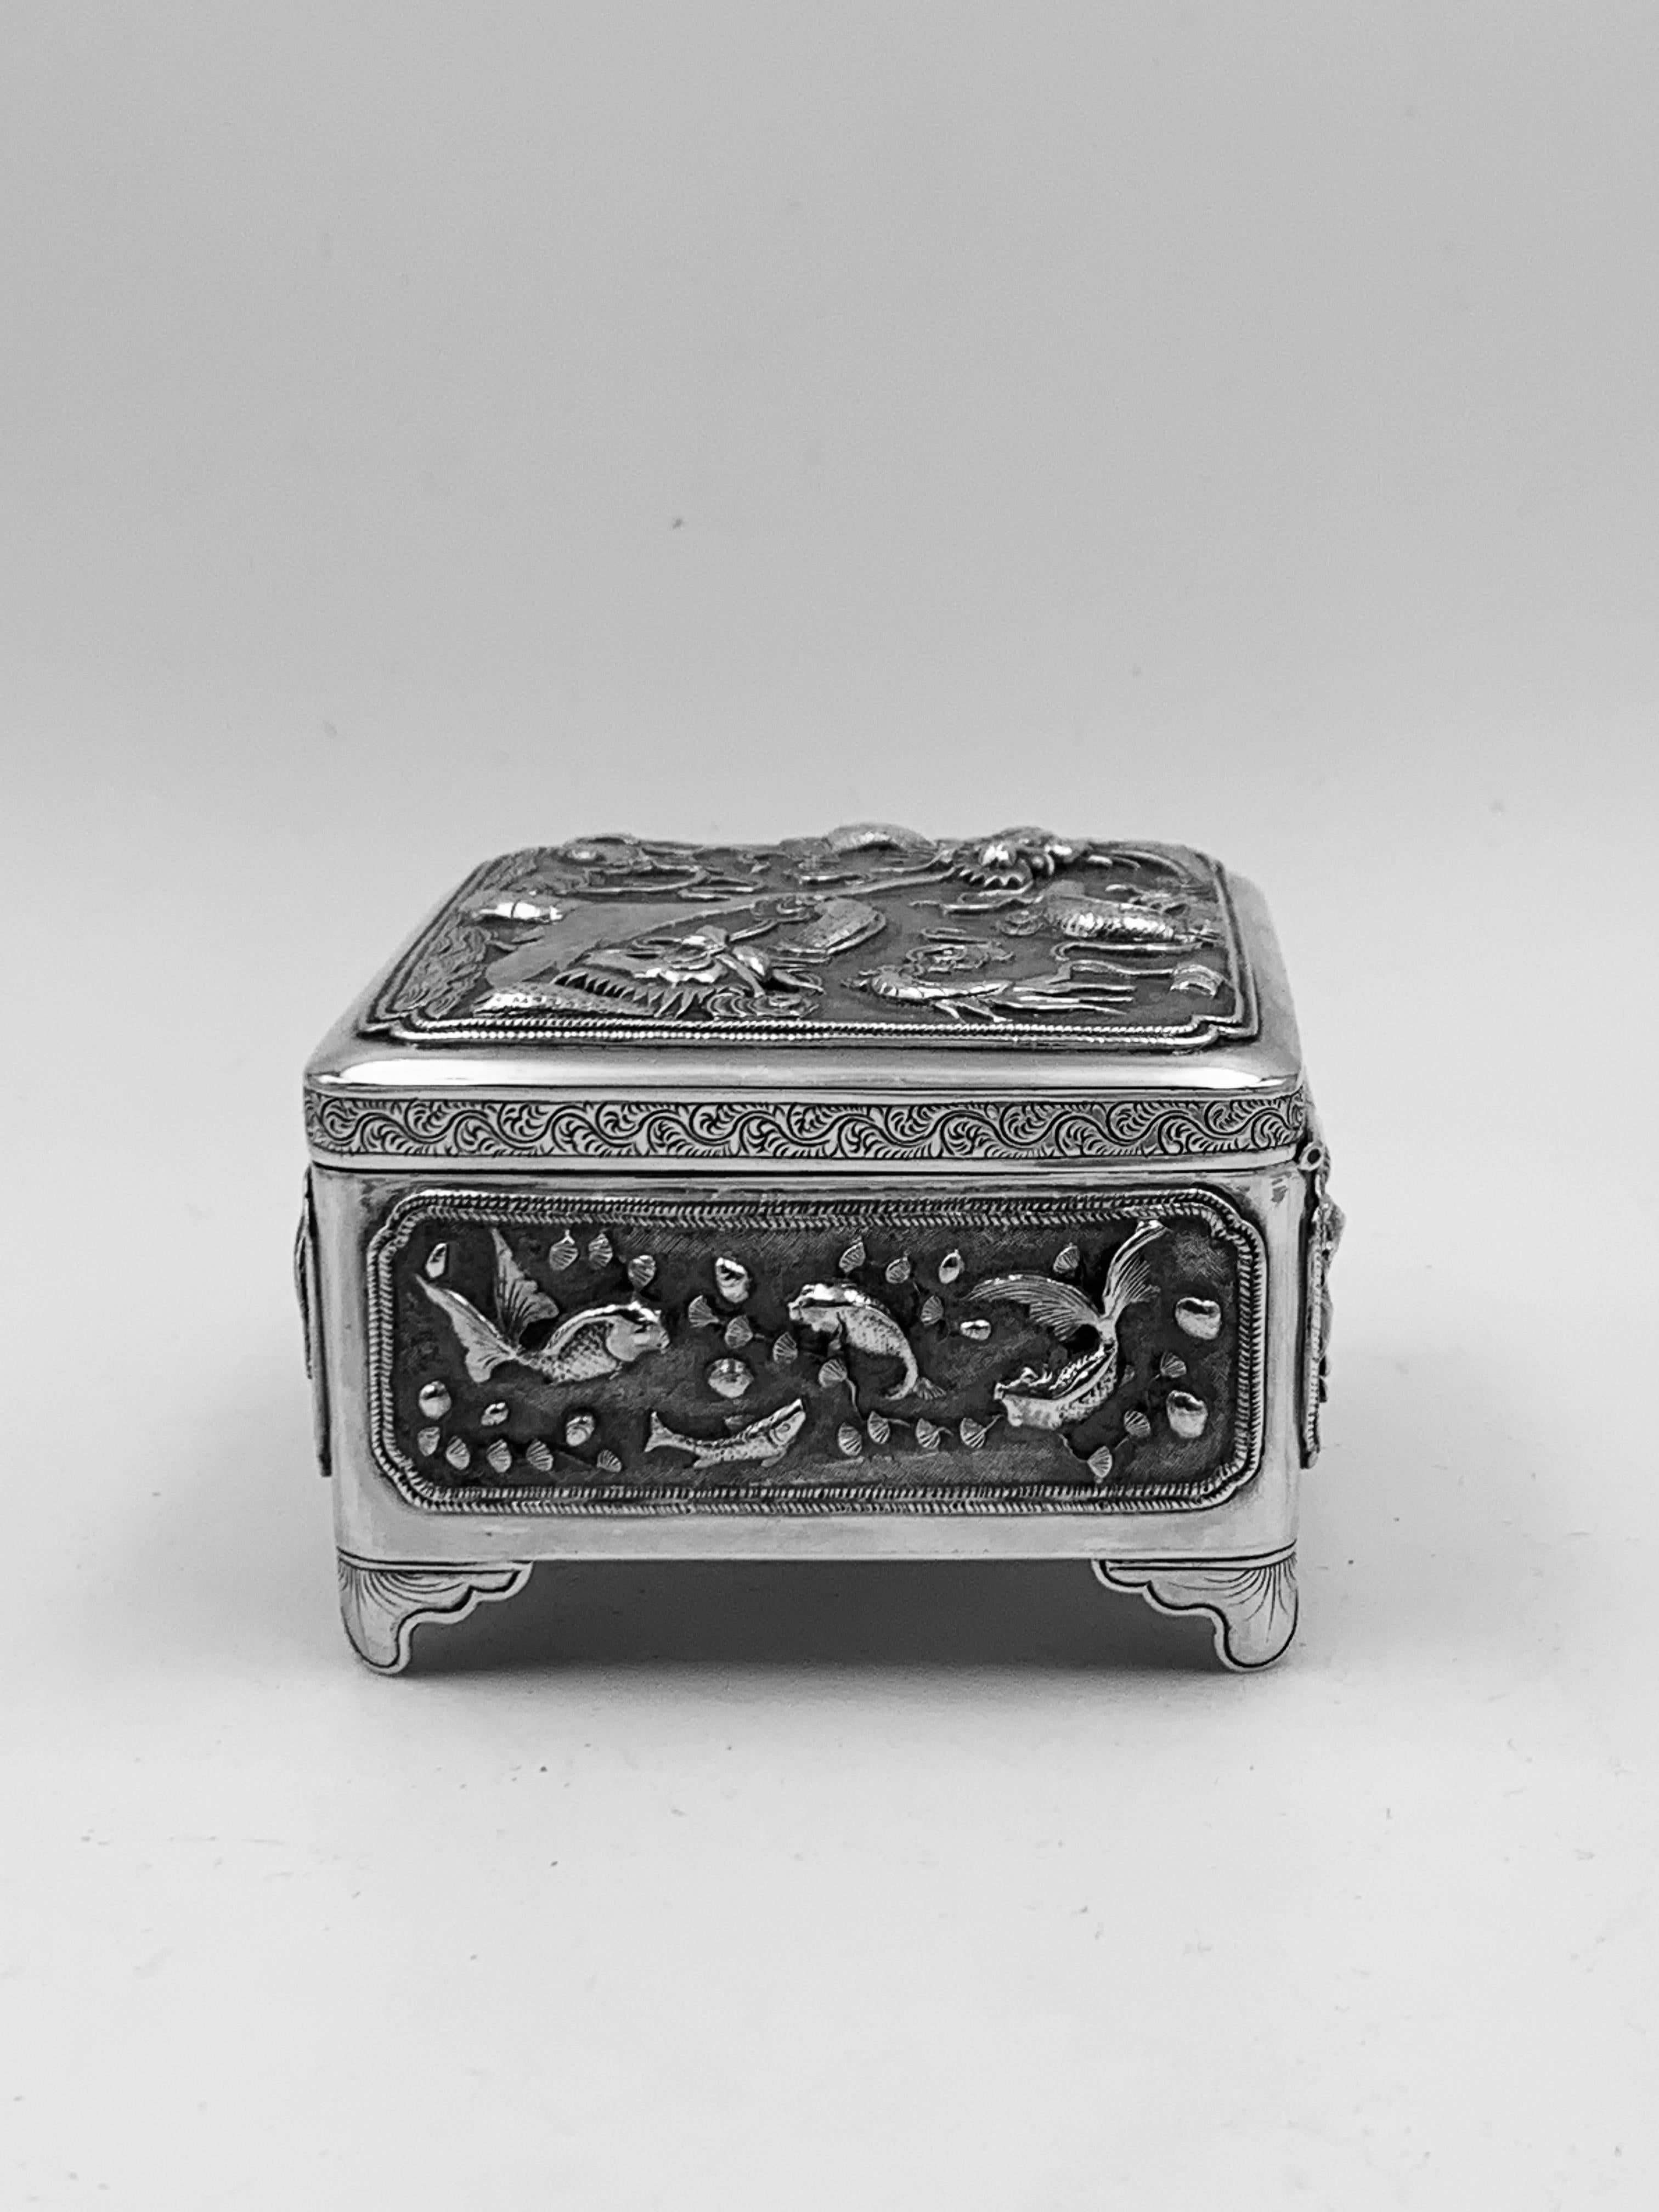 A Chinese Export Silver Box, c1890. Two dragon on the hinged lid. Embossed and chased with fish and crustaceans. Marked with LH, for 'Luen Hing' ’联兴‘, a retailer based in Shanghai, between 1890 and 1909, and a maker's mark '昆興' (Kun Xing). There are